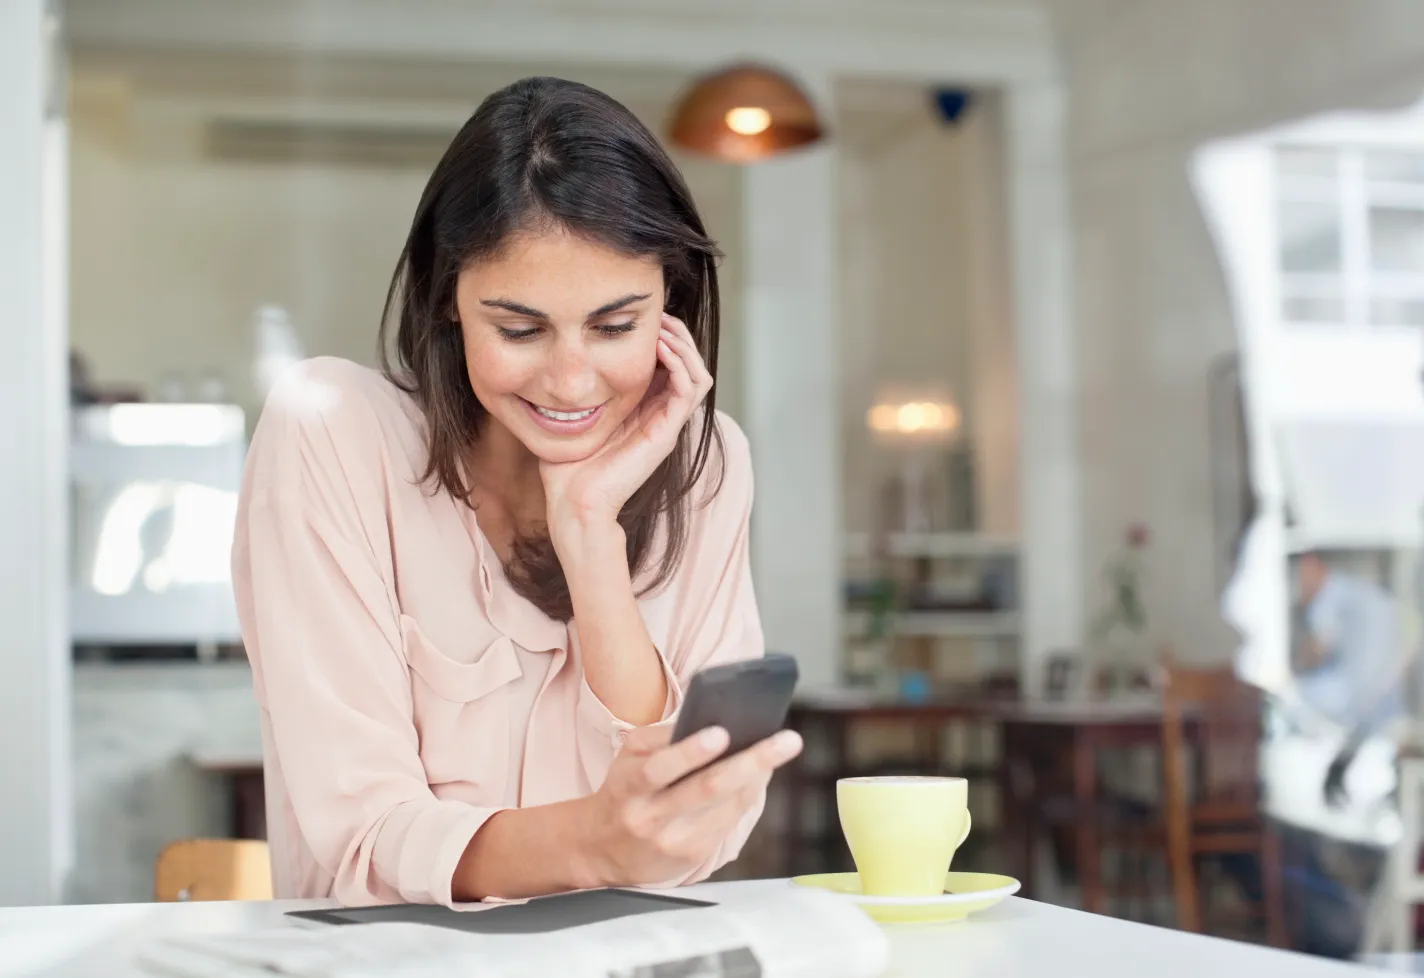 A woman is sitting at a kitchen table viewing information on her phone. 